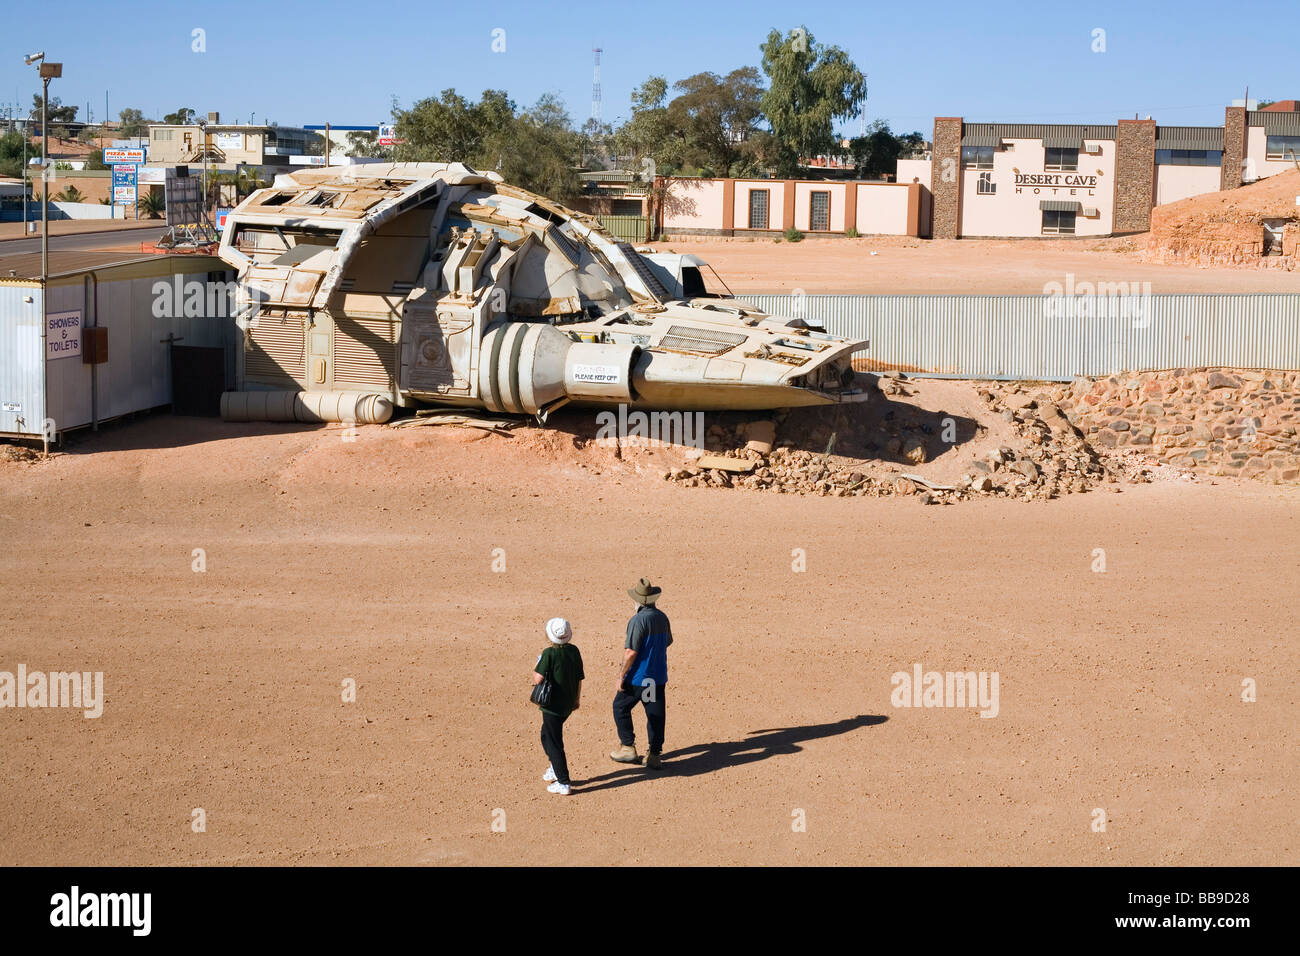 Tourists inspect a spaceship - a movie prop - in the main street of Coober Pedy, South Australia, AUSTRALIA Stock Photo